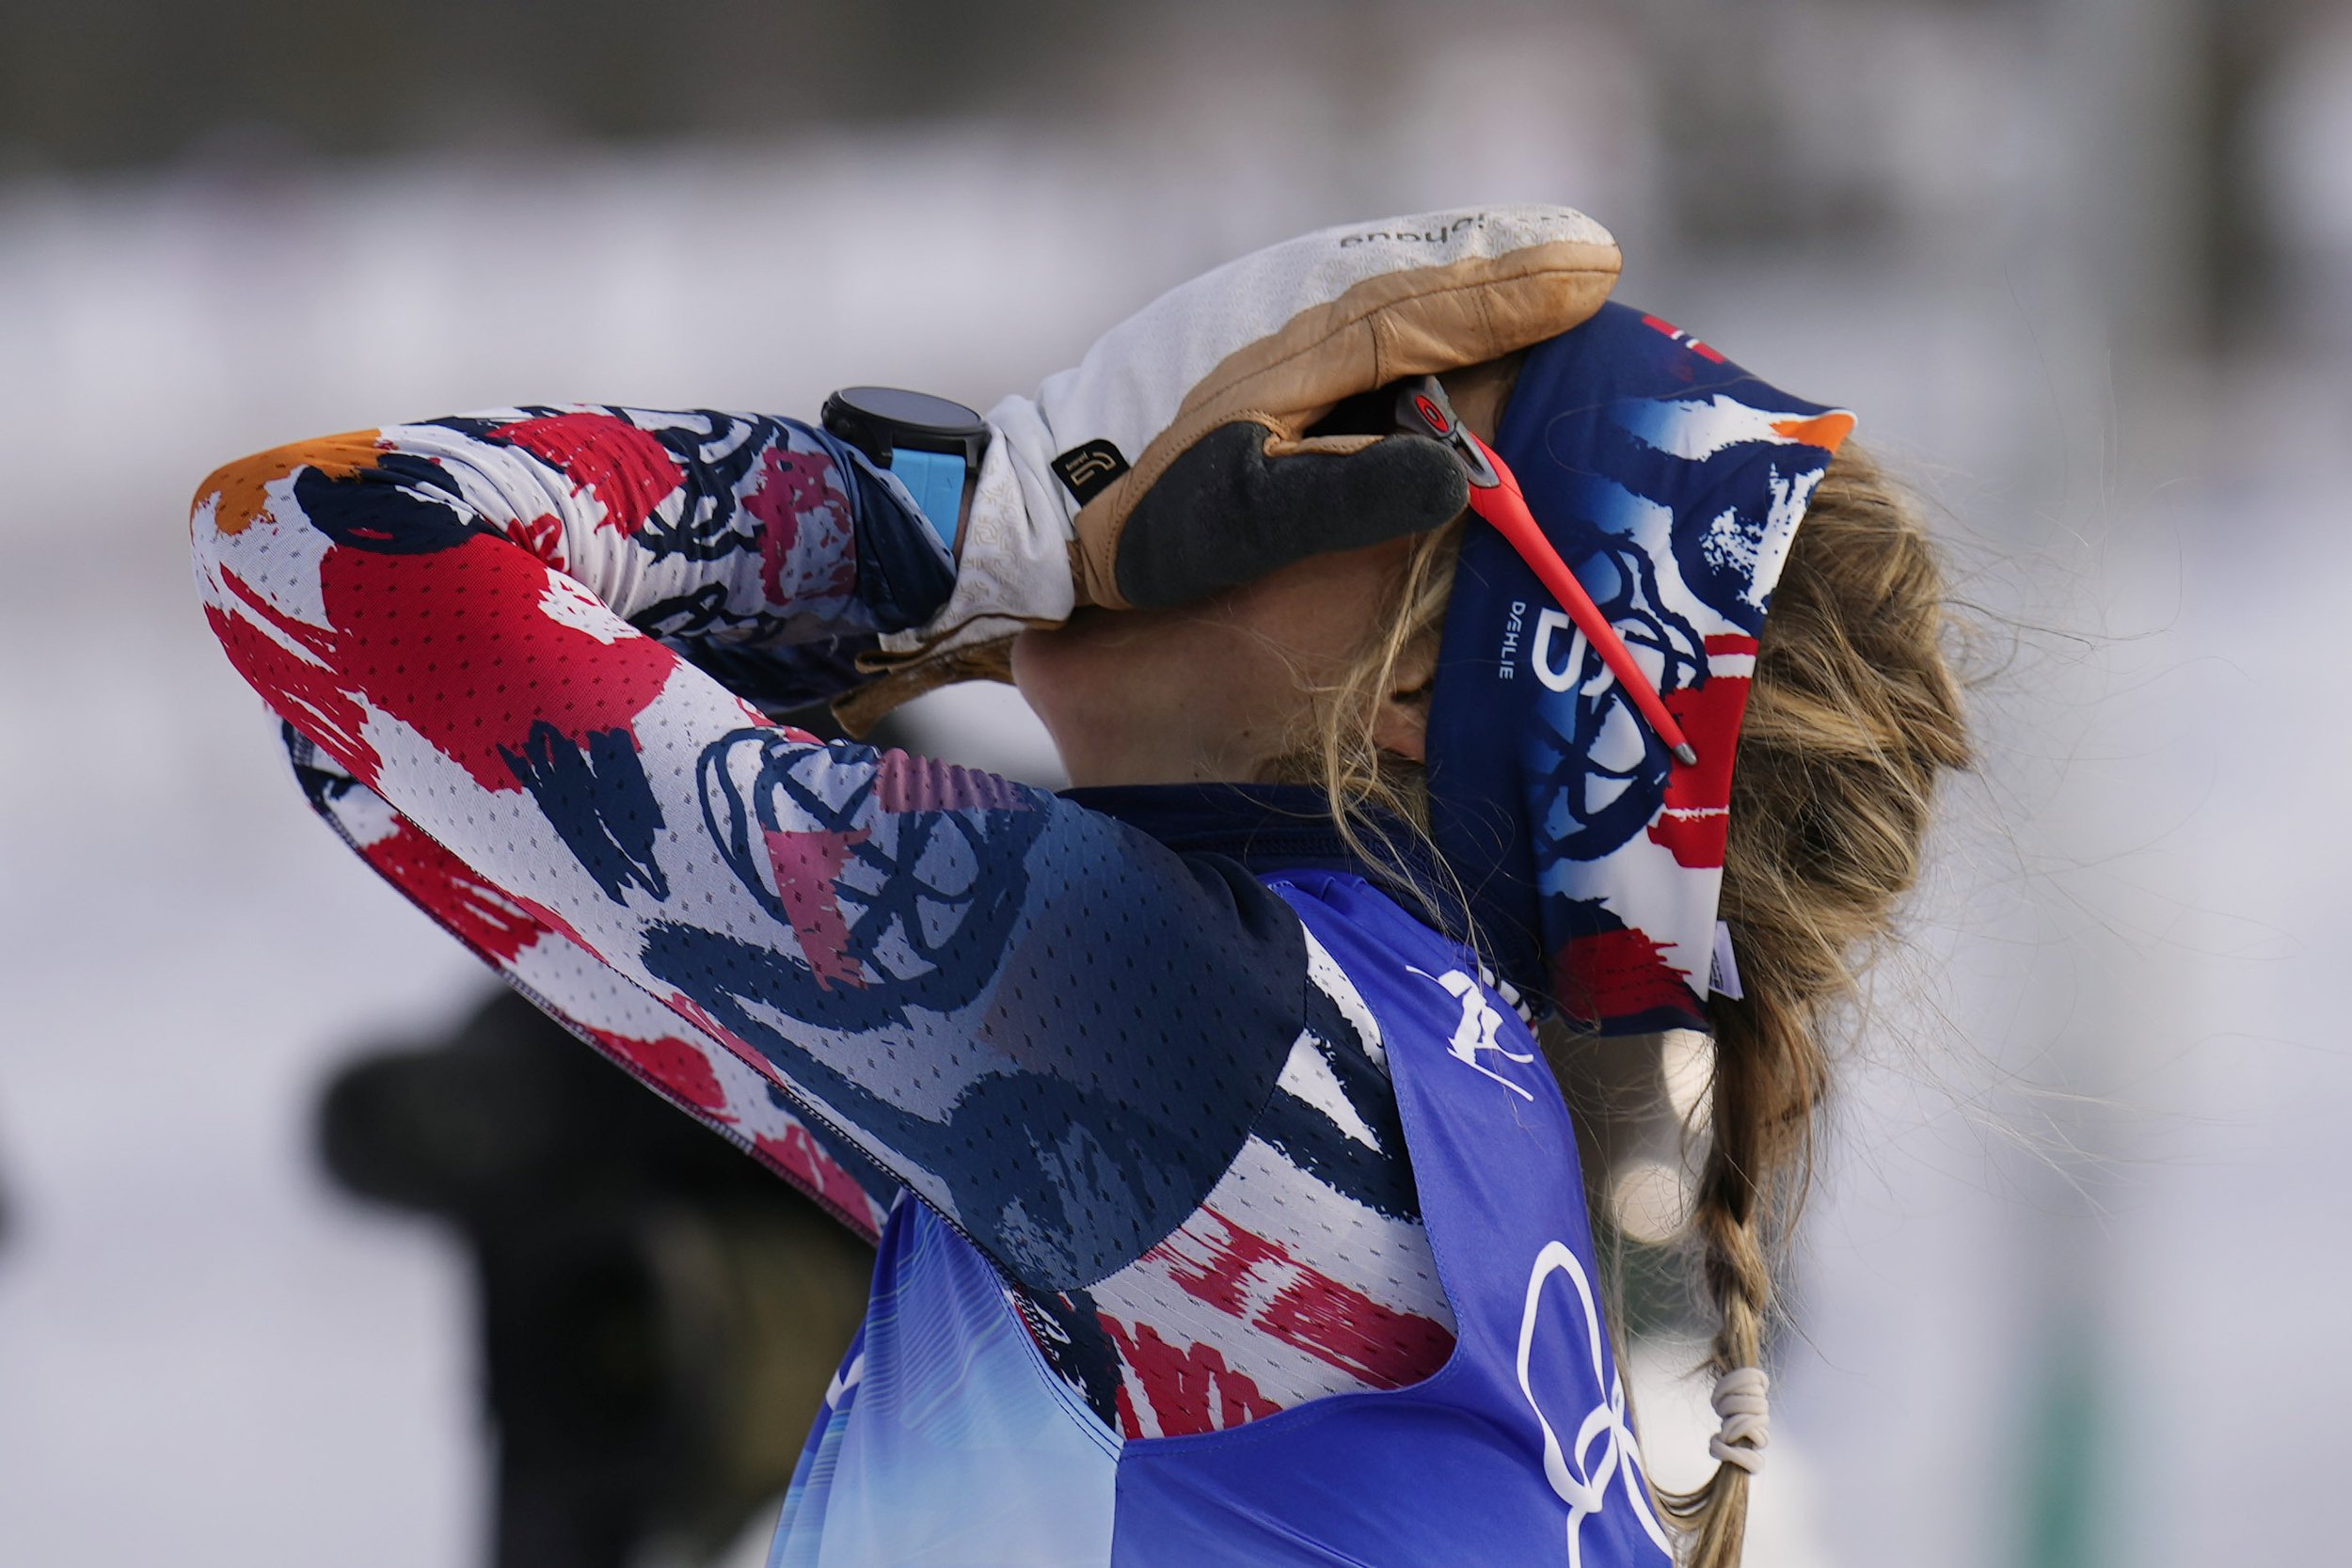  Norway's Therese Johaug reacts after finishing the women's 10km classic cross-country skiing competition at the 2022 Winter Olympics, Thursday, Feb. 10, 2022, in Zhangjiakou, China. (AP Photo/Alessandra Tarantino) 